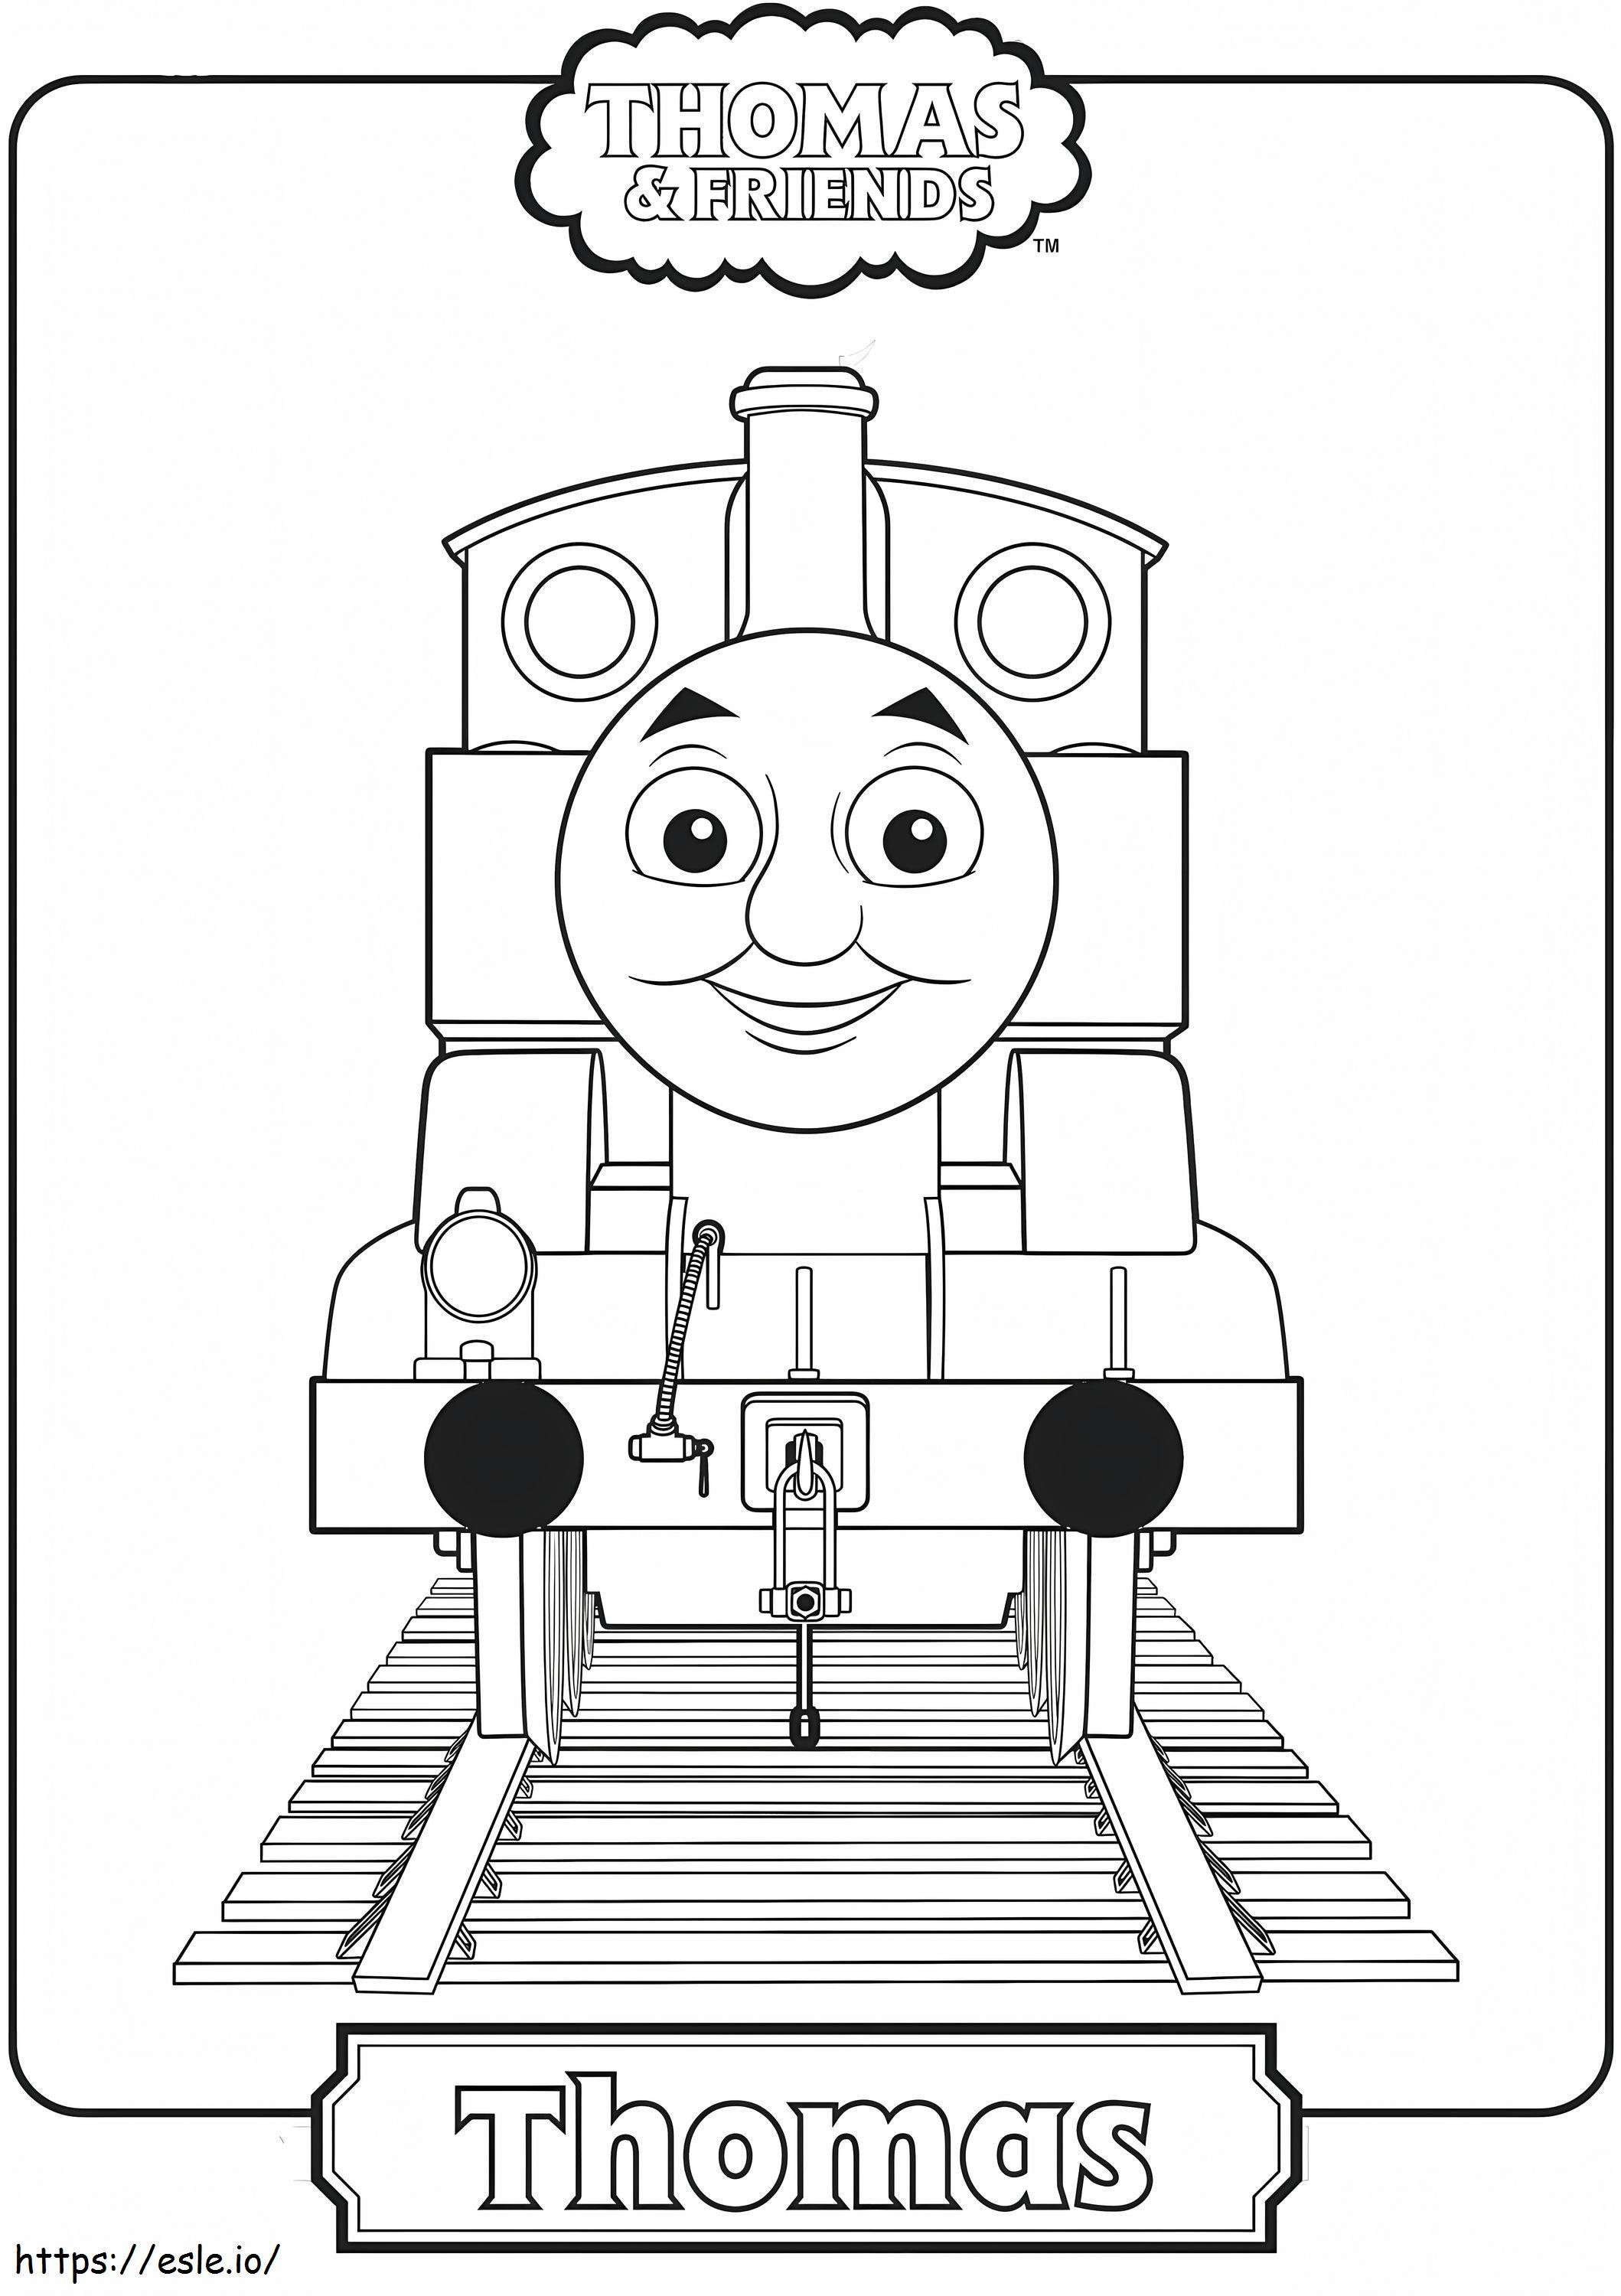 1576481934 Thomas The Train coloring page